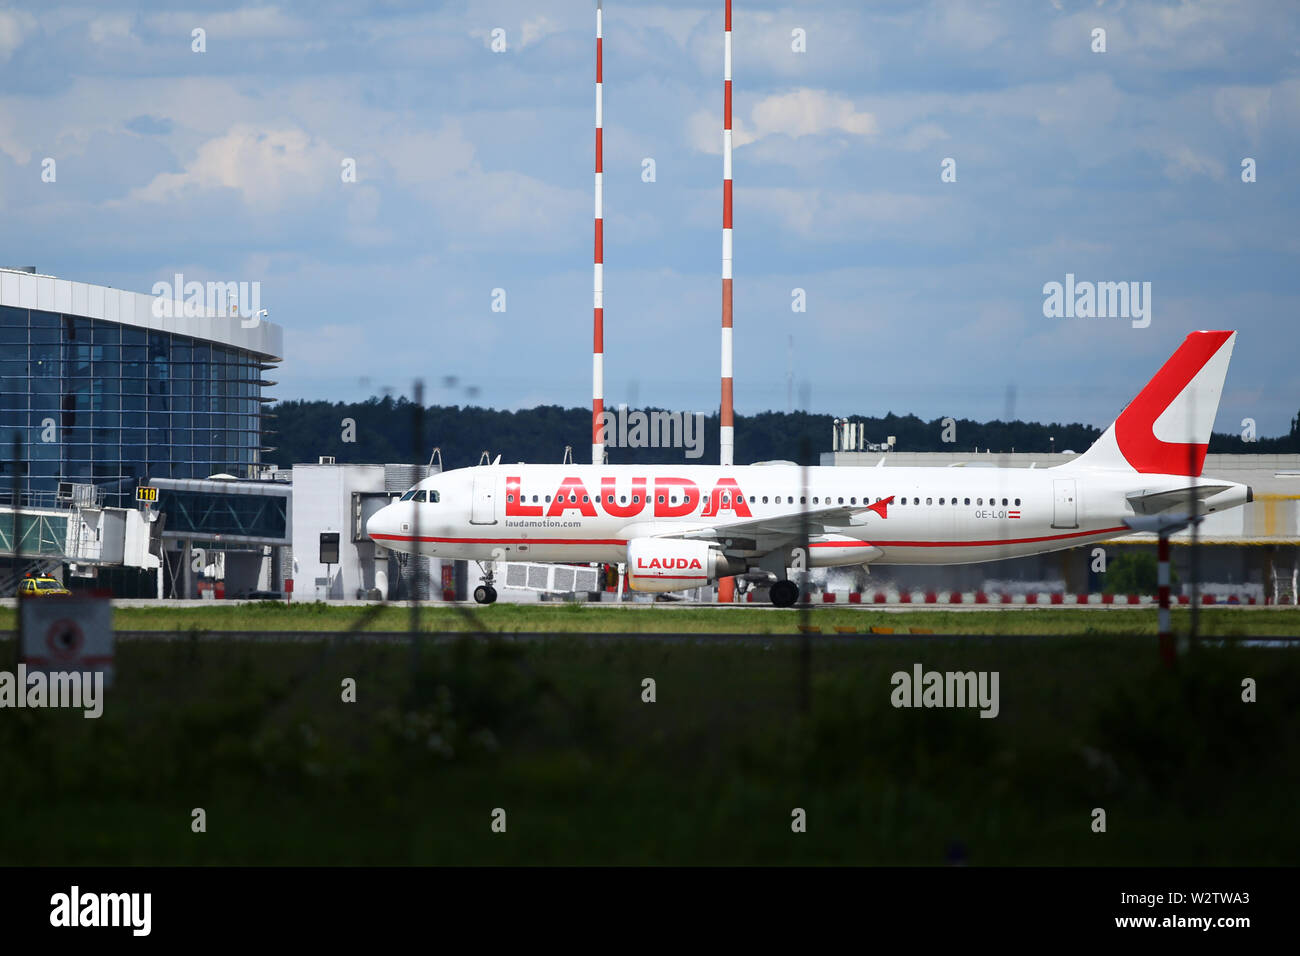 Otopeni, Romania - May 22, 2019: A Lauda commercial airplane is taking off from the Henri Coanda International Airport. Stock Photo